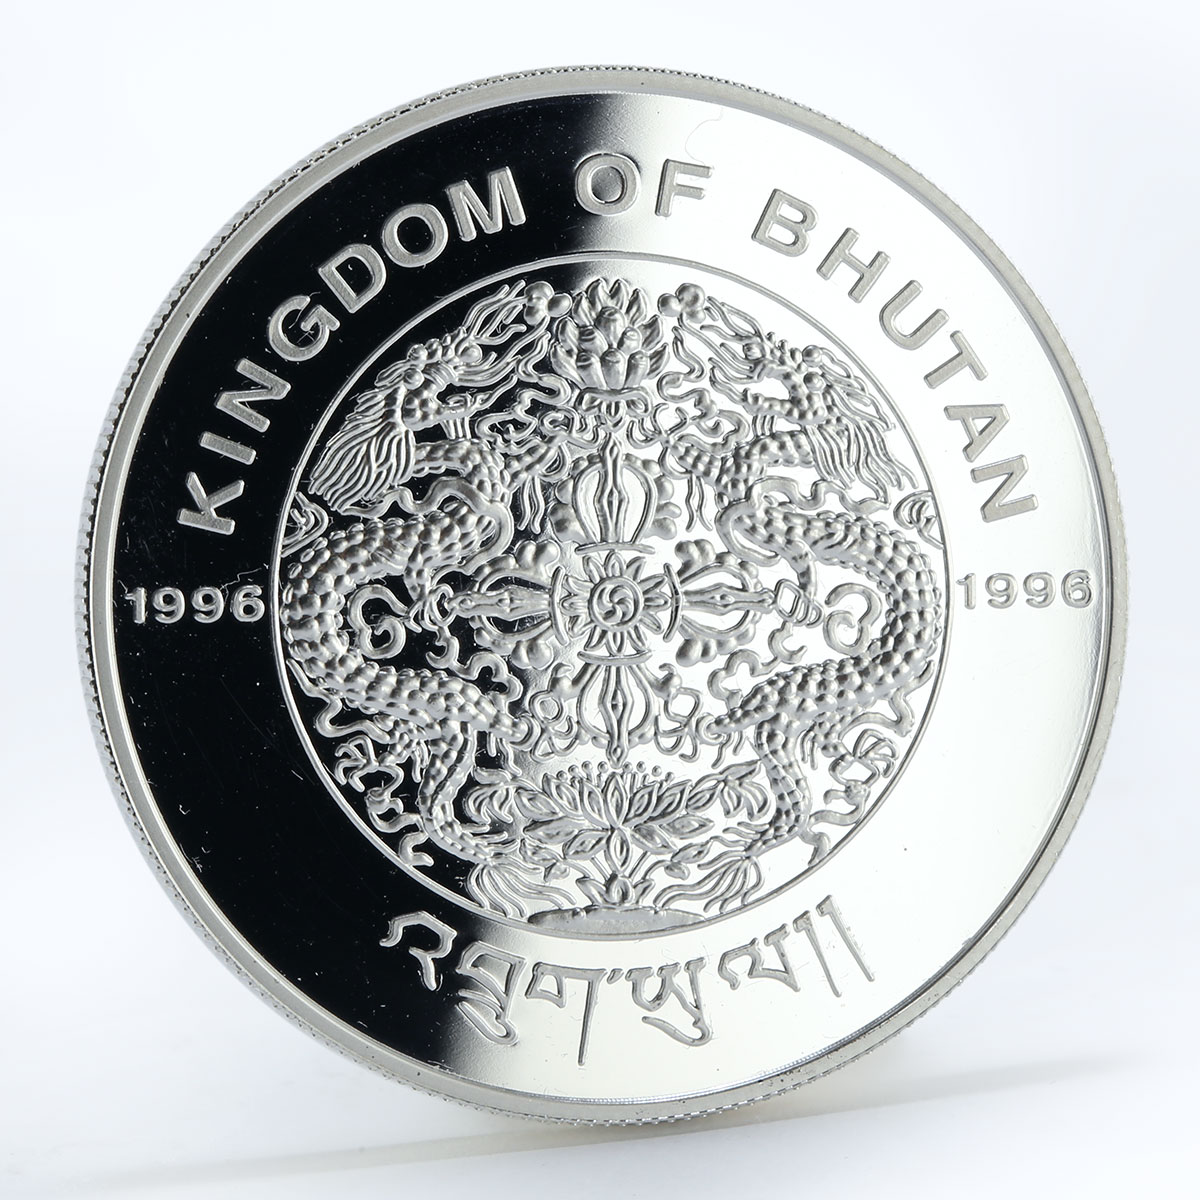 Bhutan 300 ngultrums Year of the Monkey proof silver coin 1996